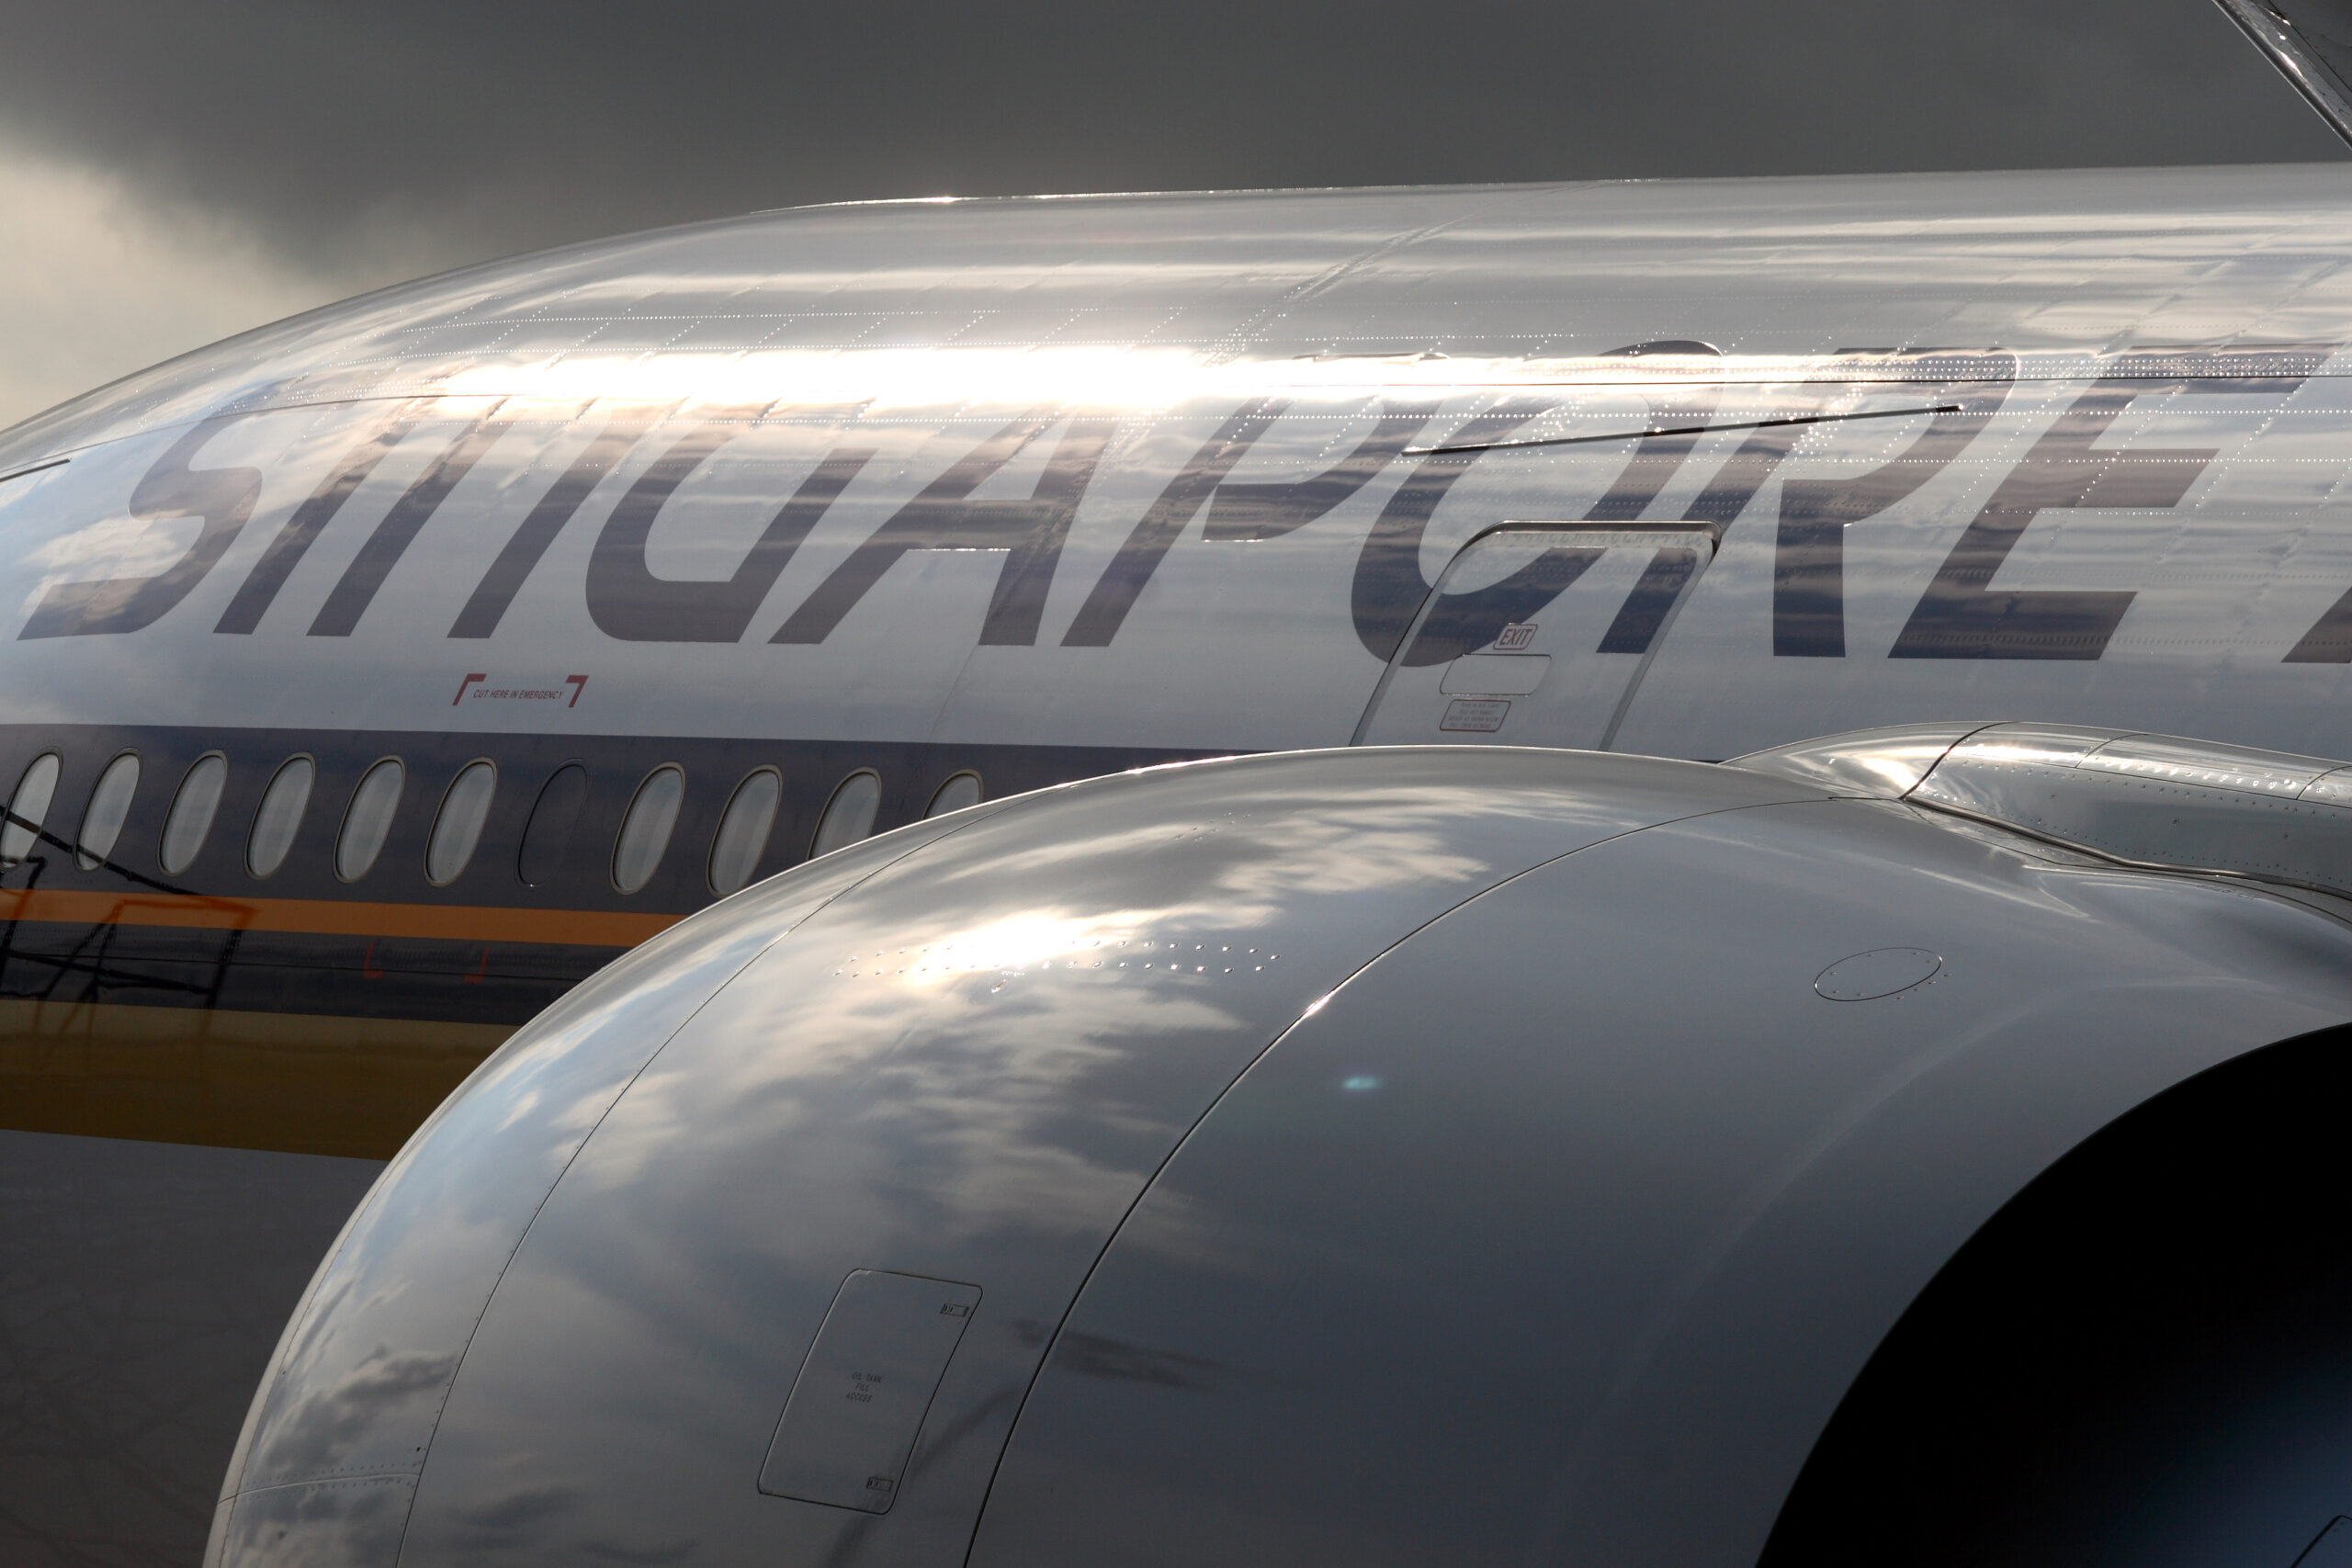 Close up of the side of a Singapore Airlines aircraft.